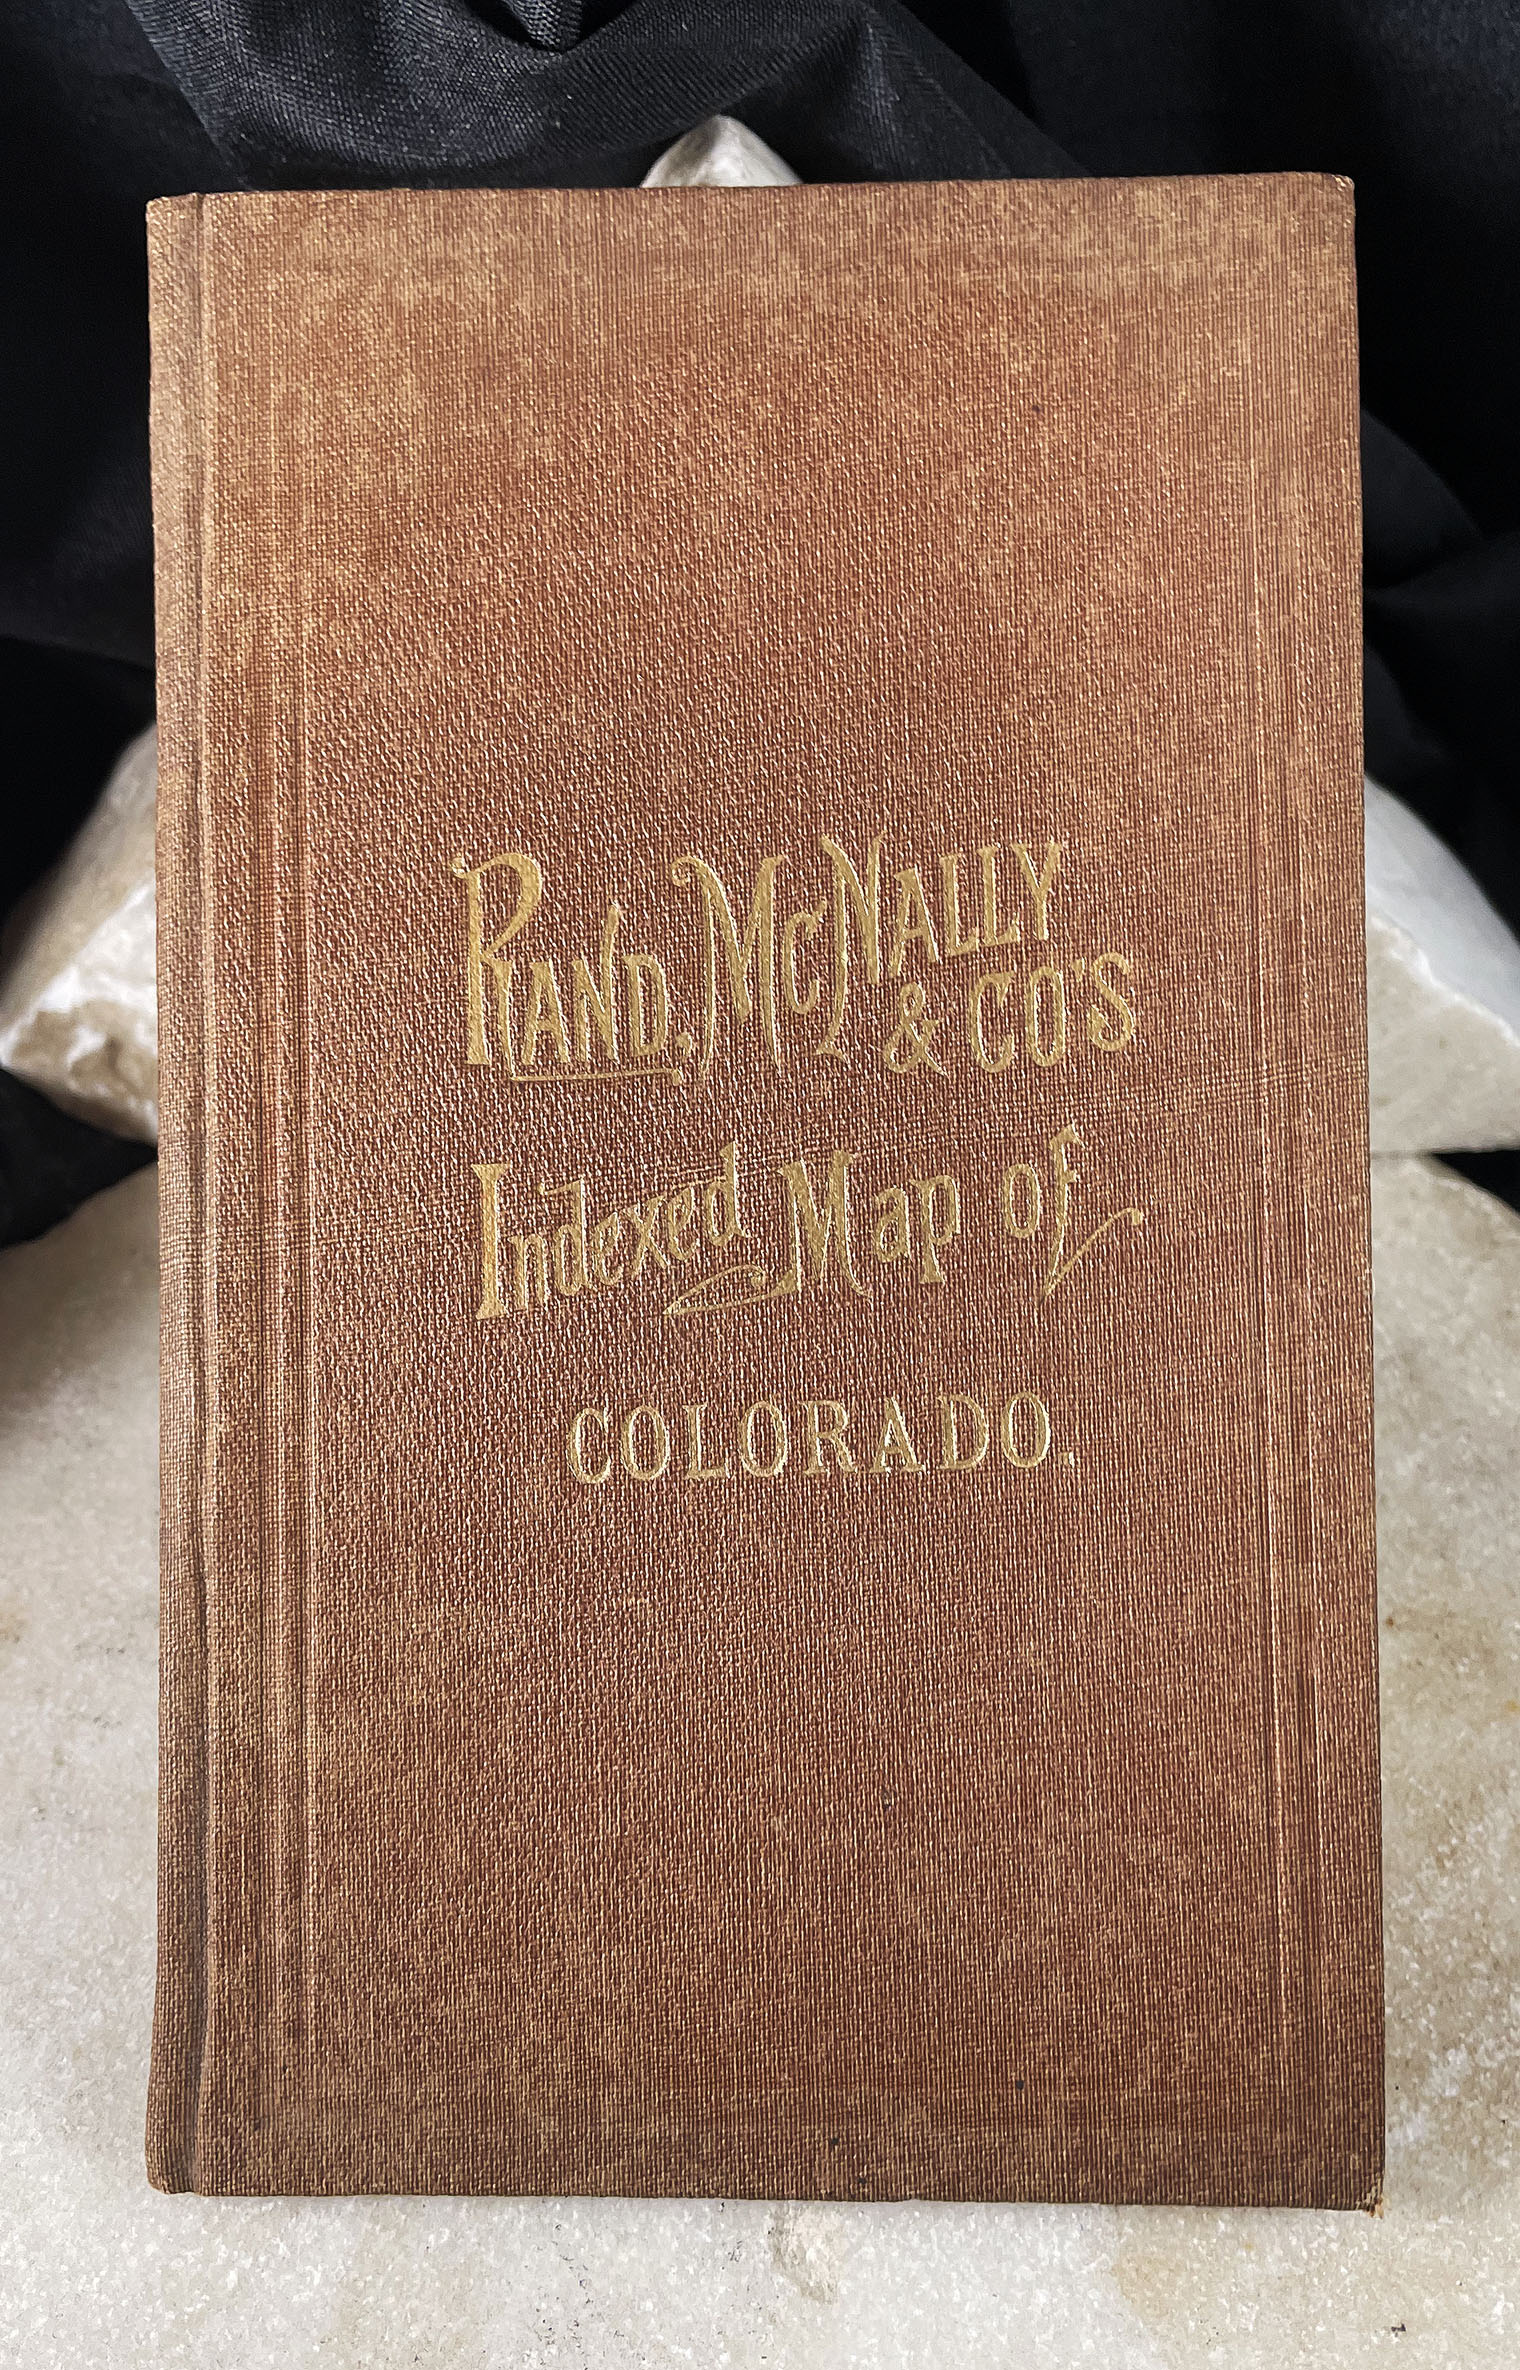 MAP OF COLORADO indexed Rand McNally pocket map with booklet 1881